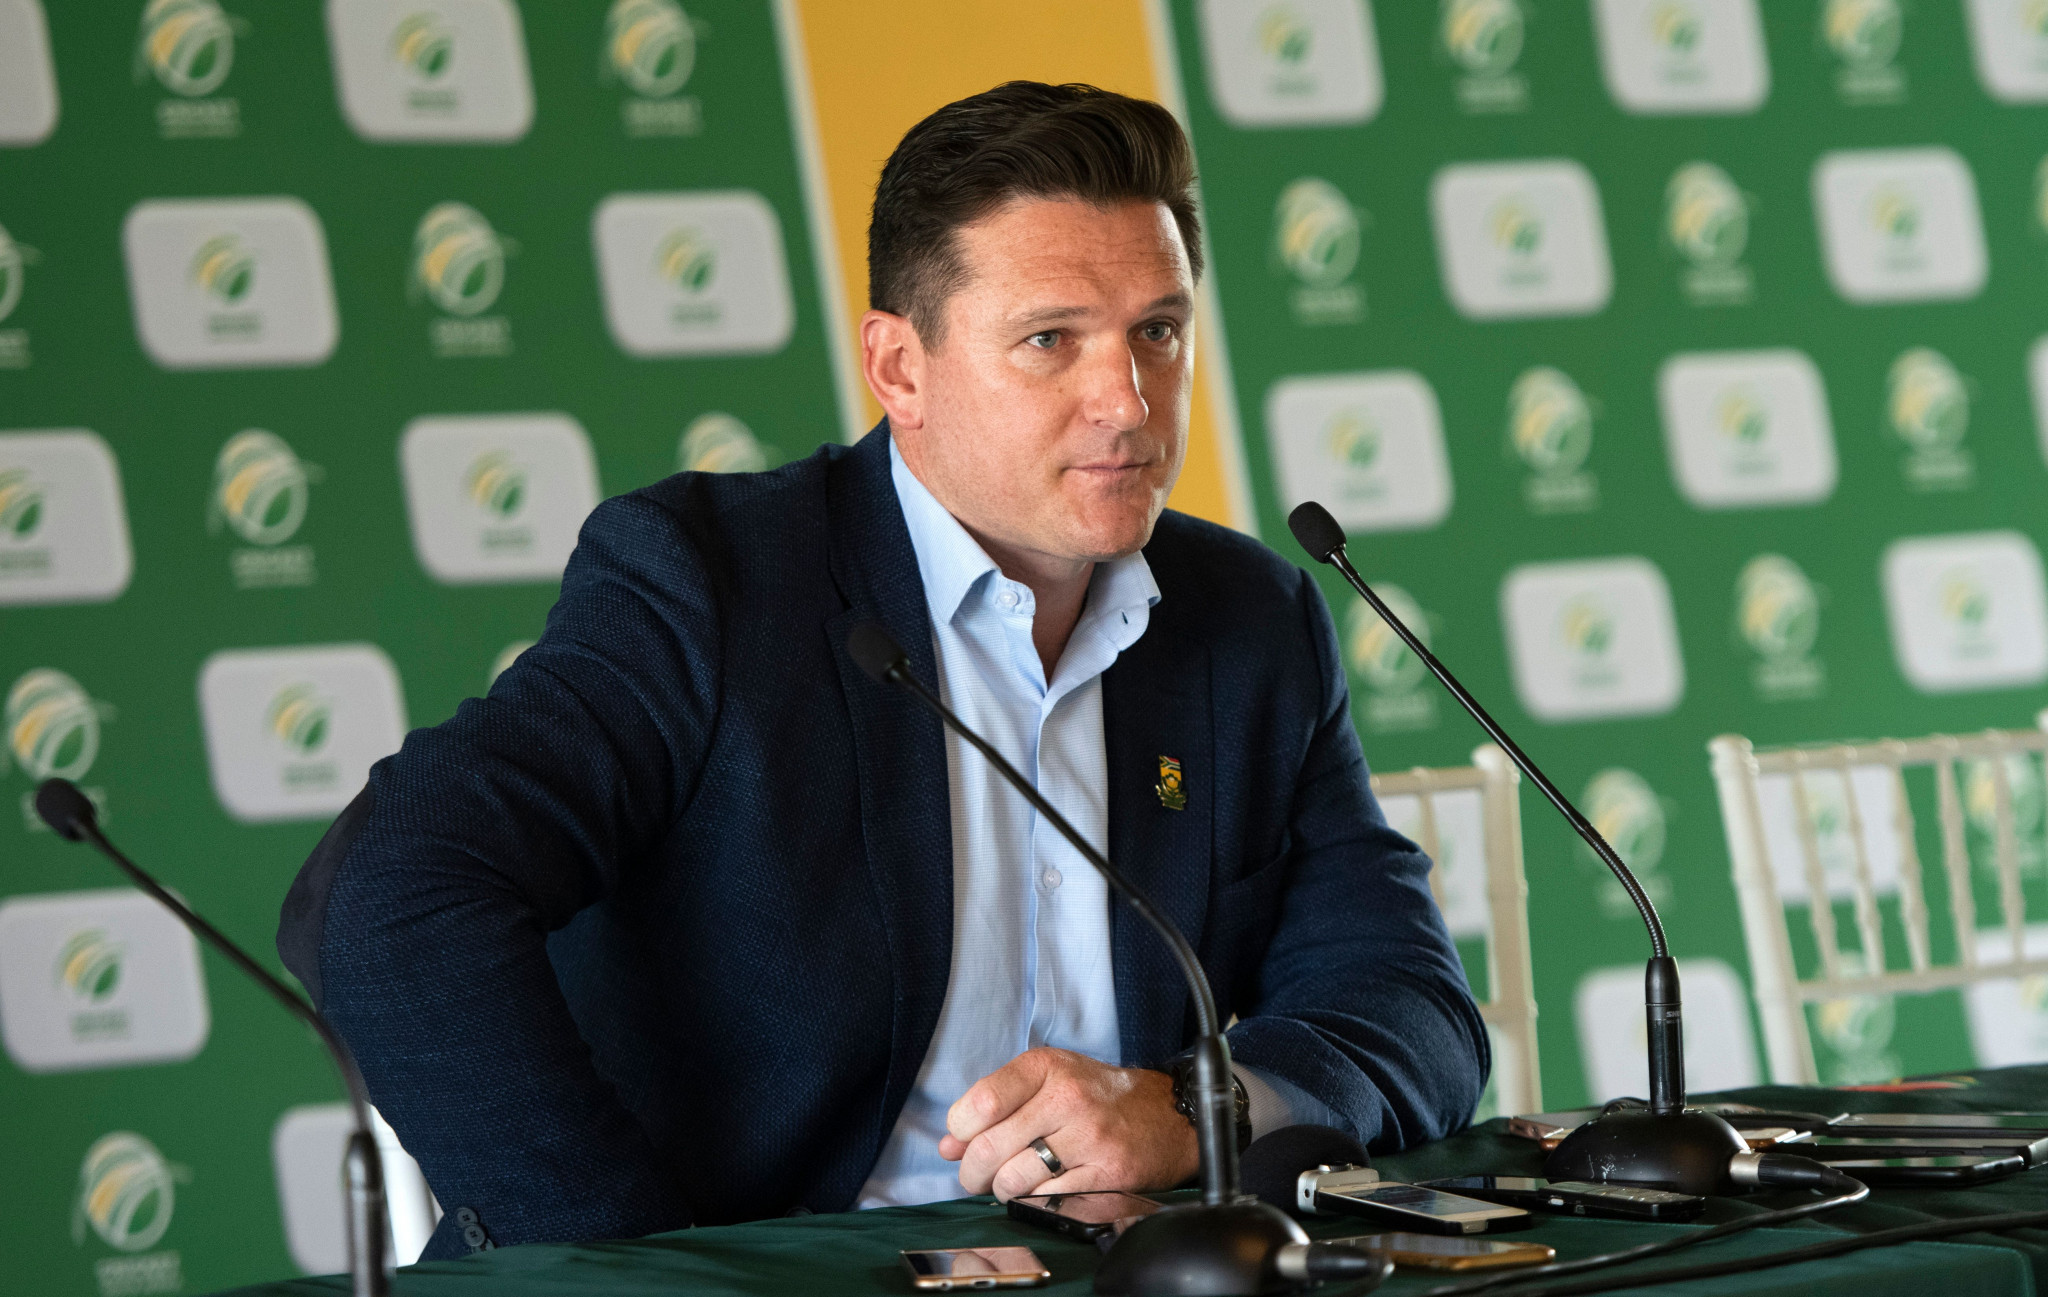 CSA director of cricket Graeme Smith said the organisation was excited about the 